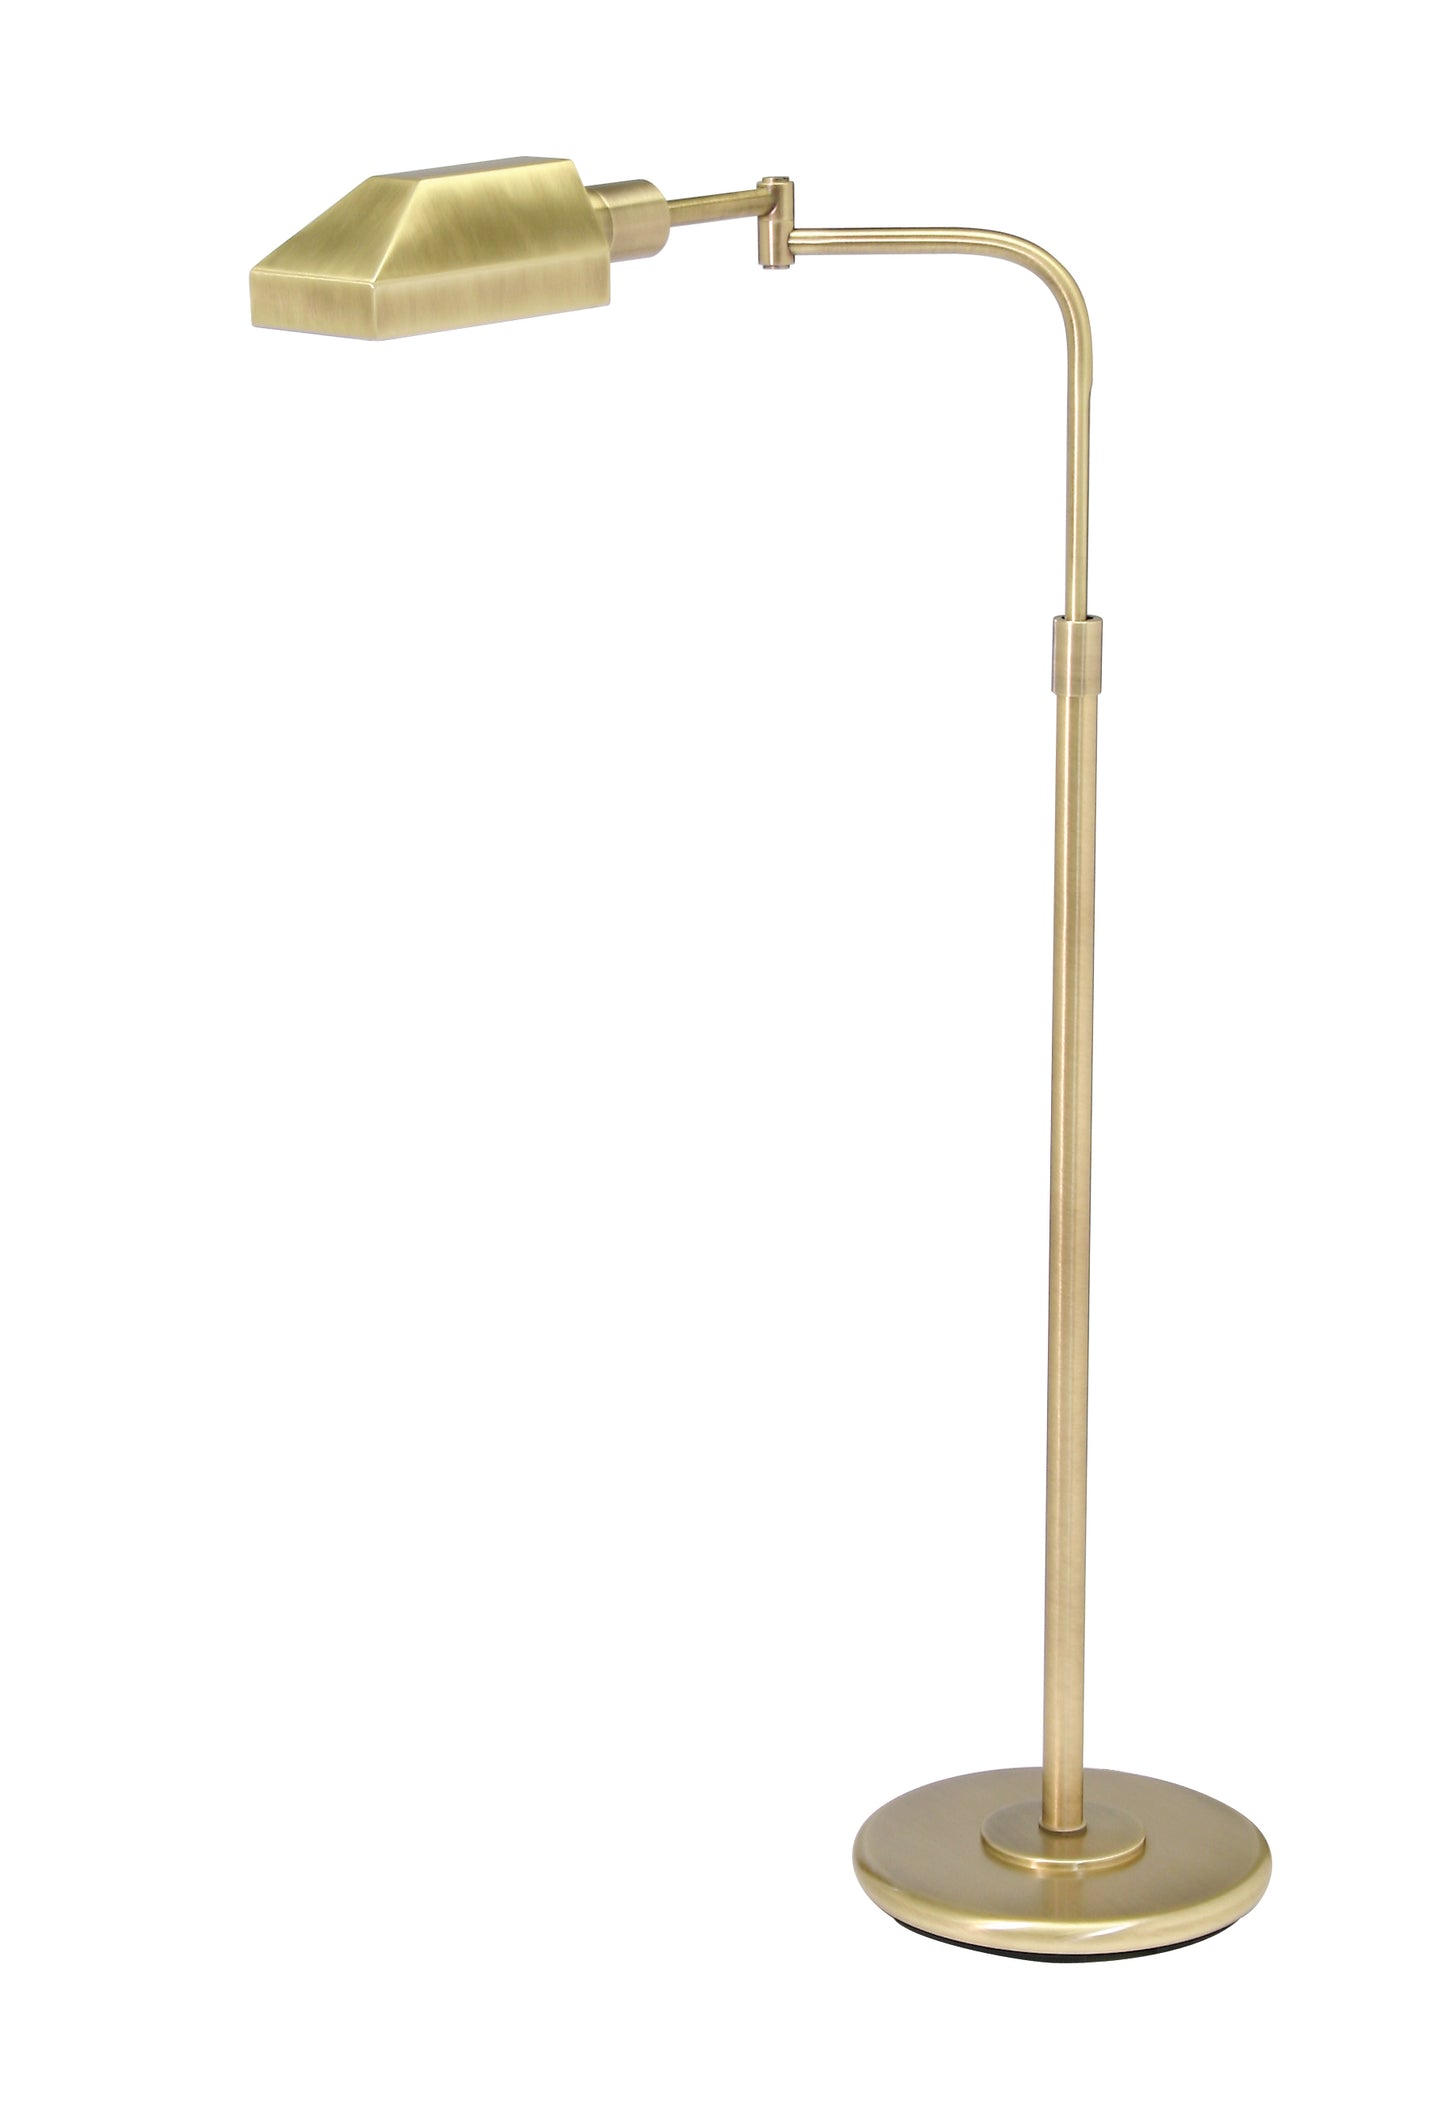 House of Troy Home Office Antique Brass Floor Lamp PH100-71-J